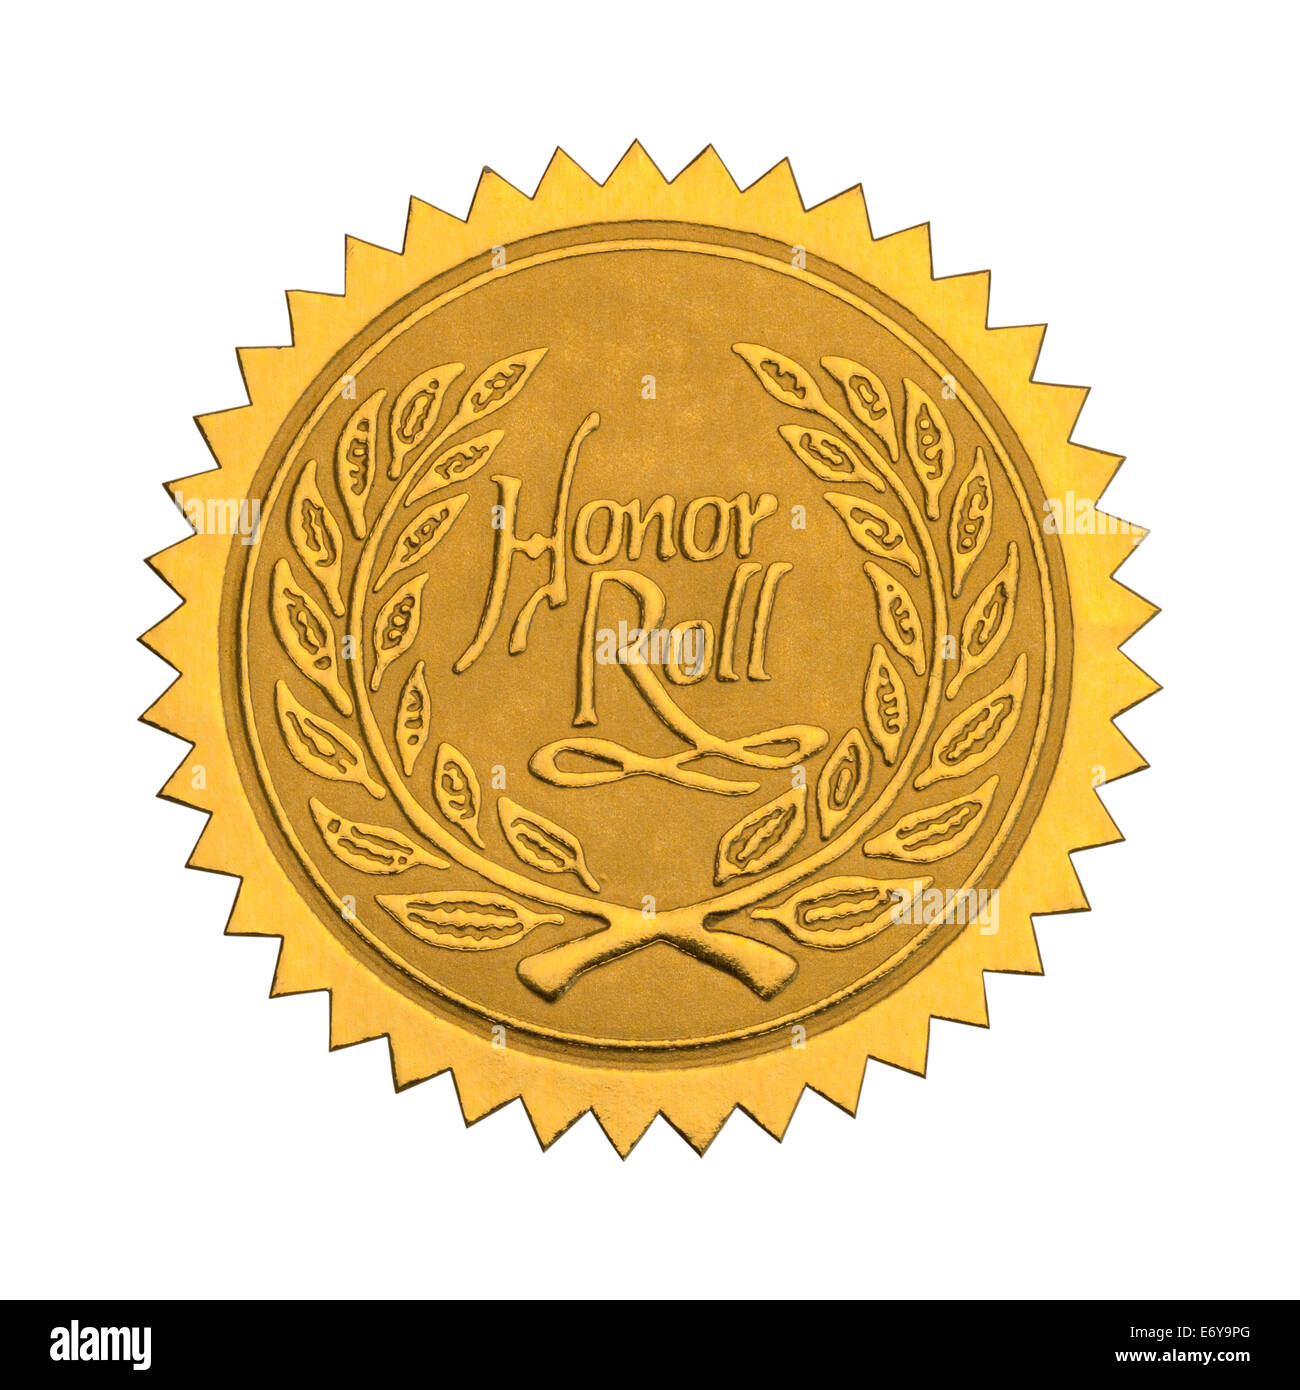 Gold Star Seal with Honor Roll Wreath Isolated on White Background. Stock Photo